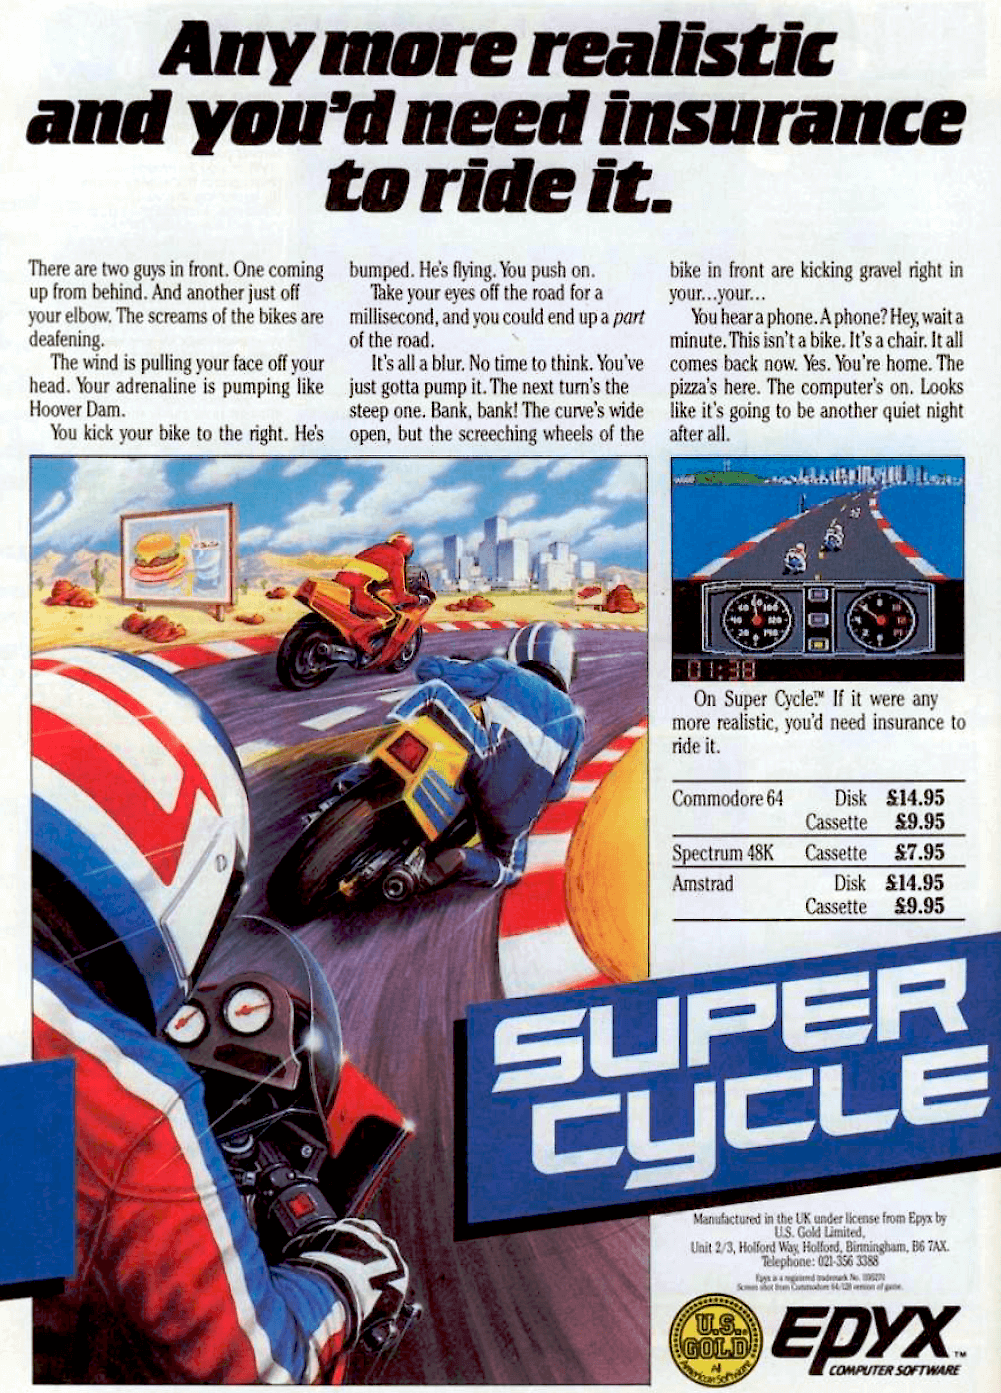 Image For Post | **Description**  
A motorbike racing game strongly resembling Sega's Hang-On titles. The game is viewed from behind the bike, which tilts as you turn. You are racing against the clock, although there are lots of other bikes on track to avoid and ride around. There are 3 skill levels, which affect the amount of time you have to complete the level, and the bonus offered if you manage to (the amount of time left, divided by a set number, bigger on lower levels). Your bike has 3 gears and appears to have a top speed of around 120 MPH. After every 2 races there's a bonus round in which you must pick up as many tokens as possible in the time limit.